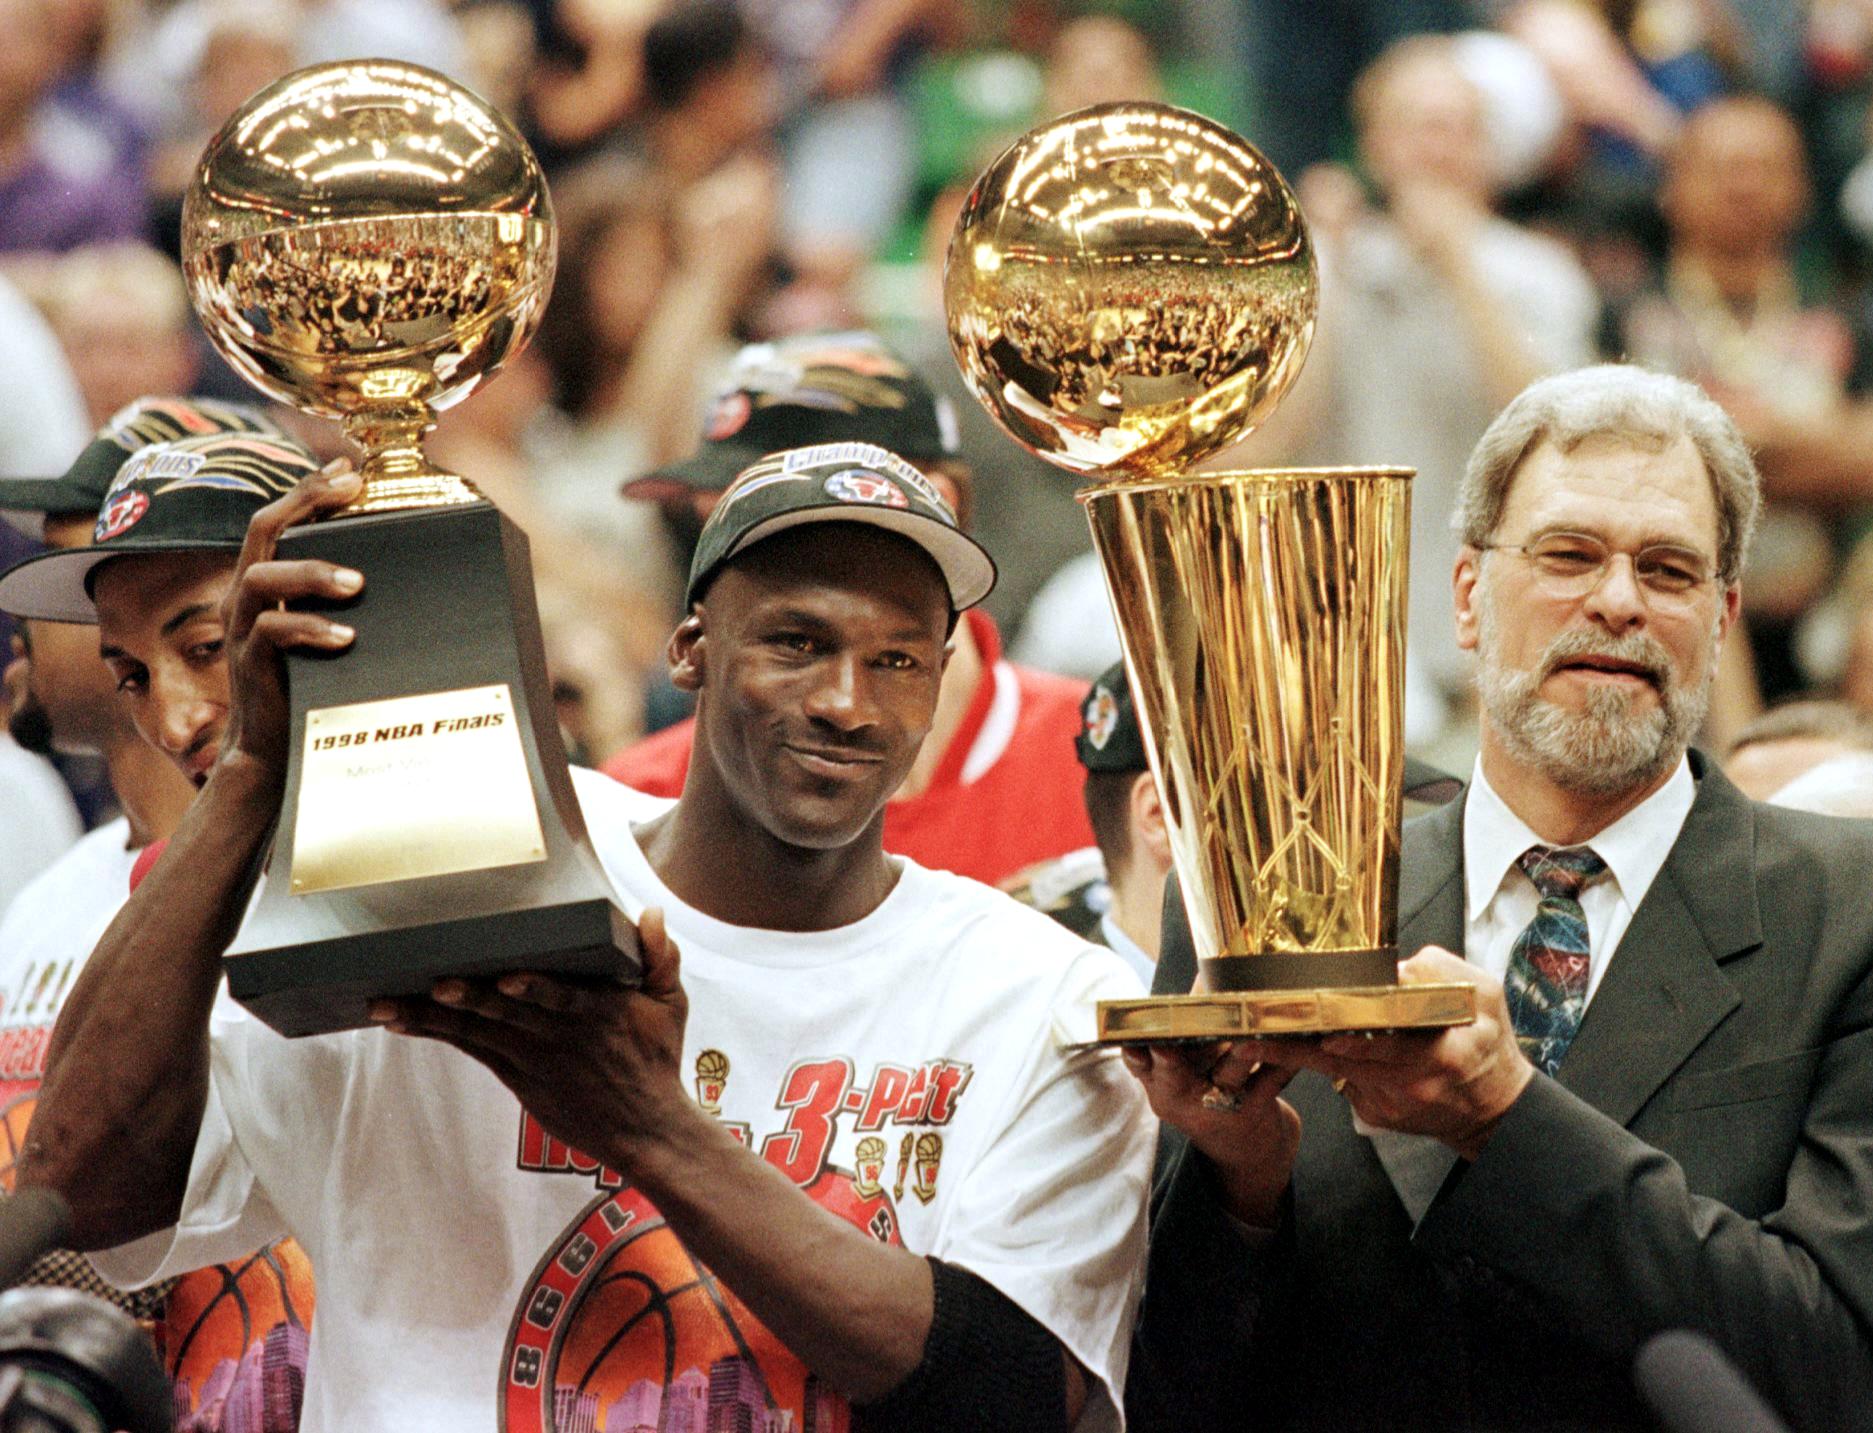 ESPN to Air Never-Before-Seen Footage of Game 6 of the 1998 NBA